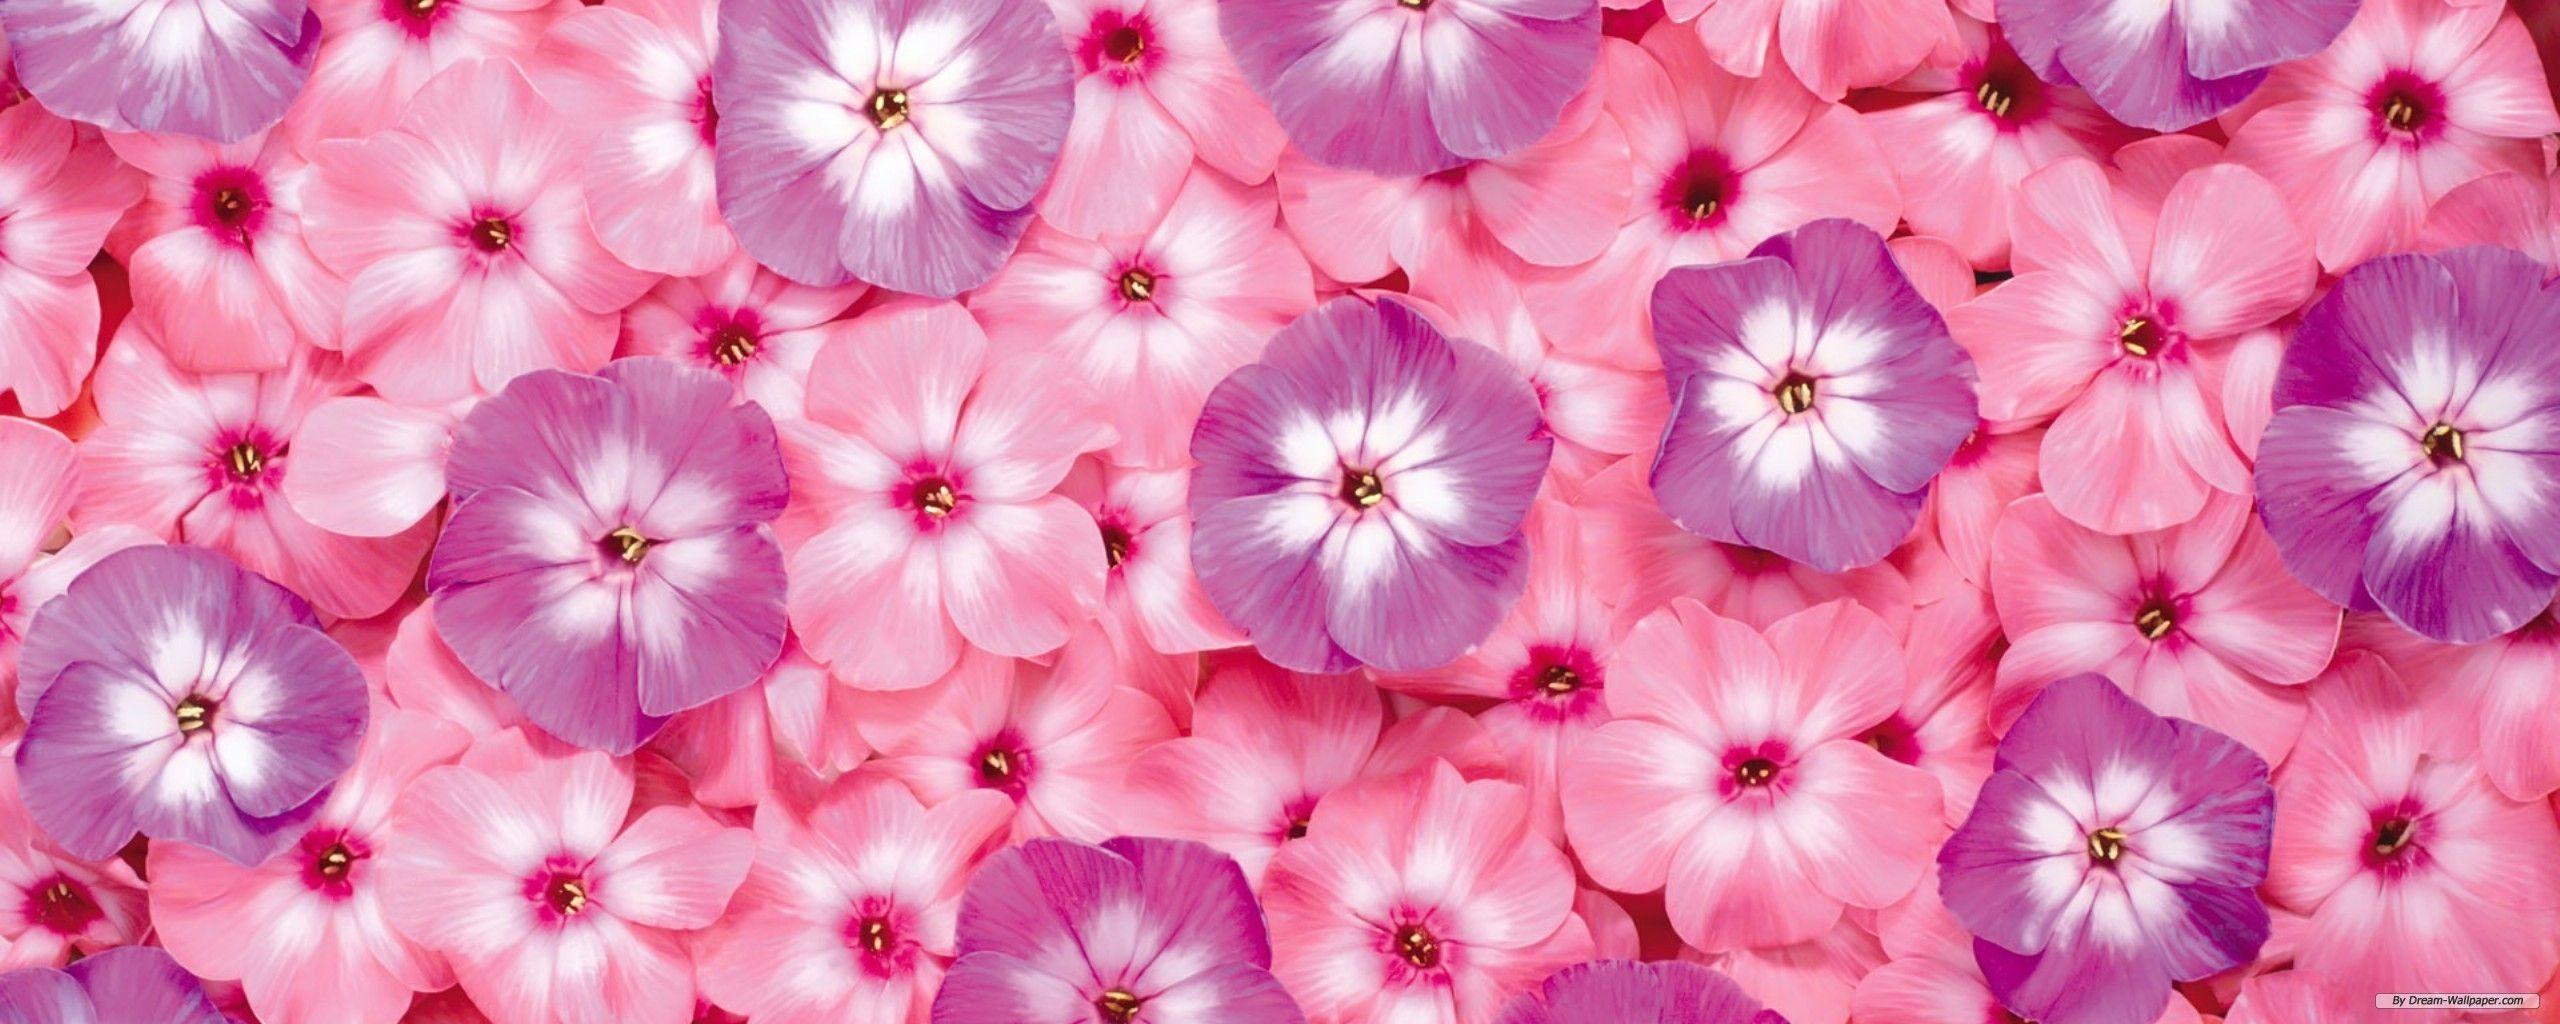 Free Flowers Wallpapers - Wallpaper Cave